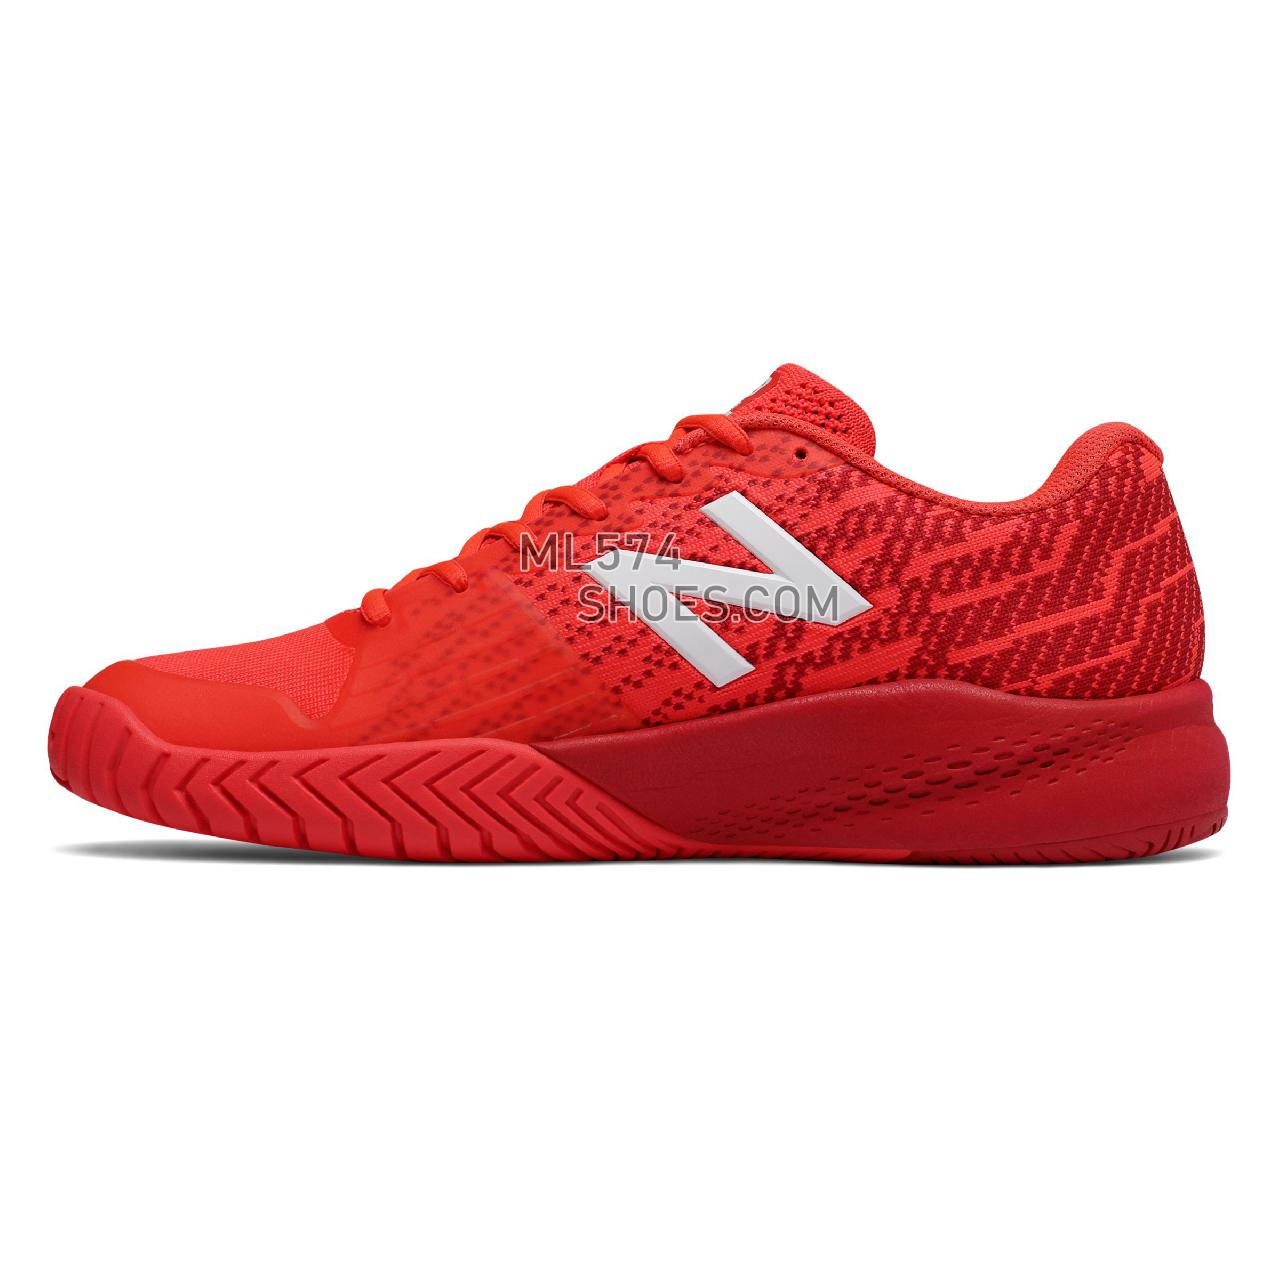 New Balance 996v3 Tournament - Men's 996 - Tennis / Court Flame with Team Red - MCH996F3